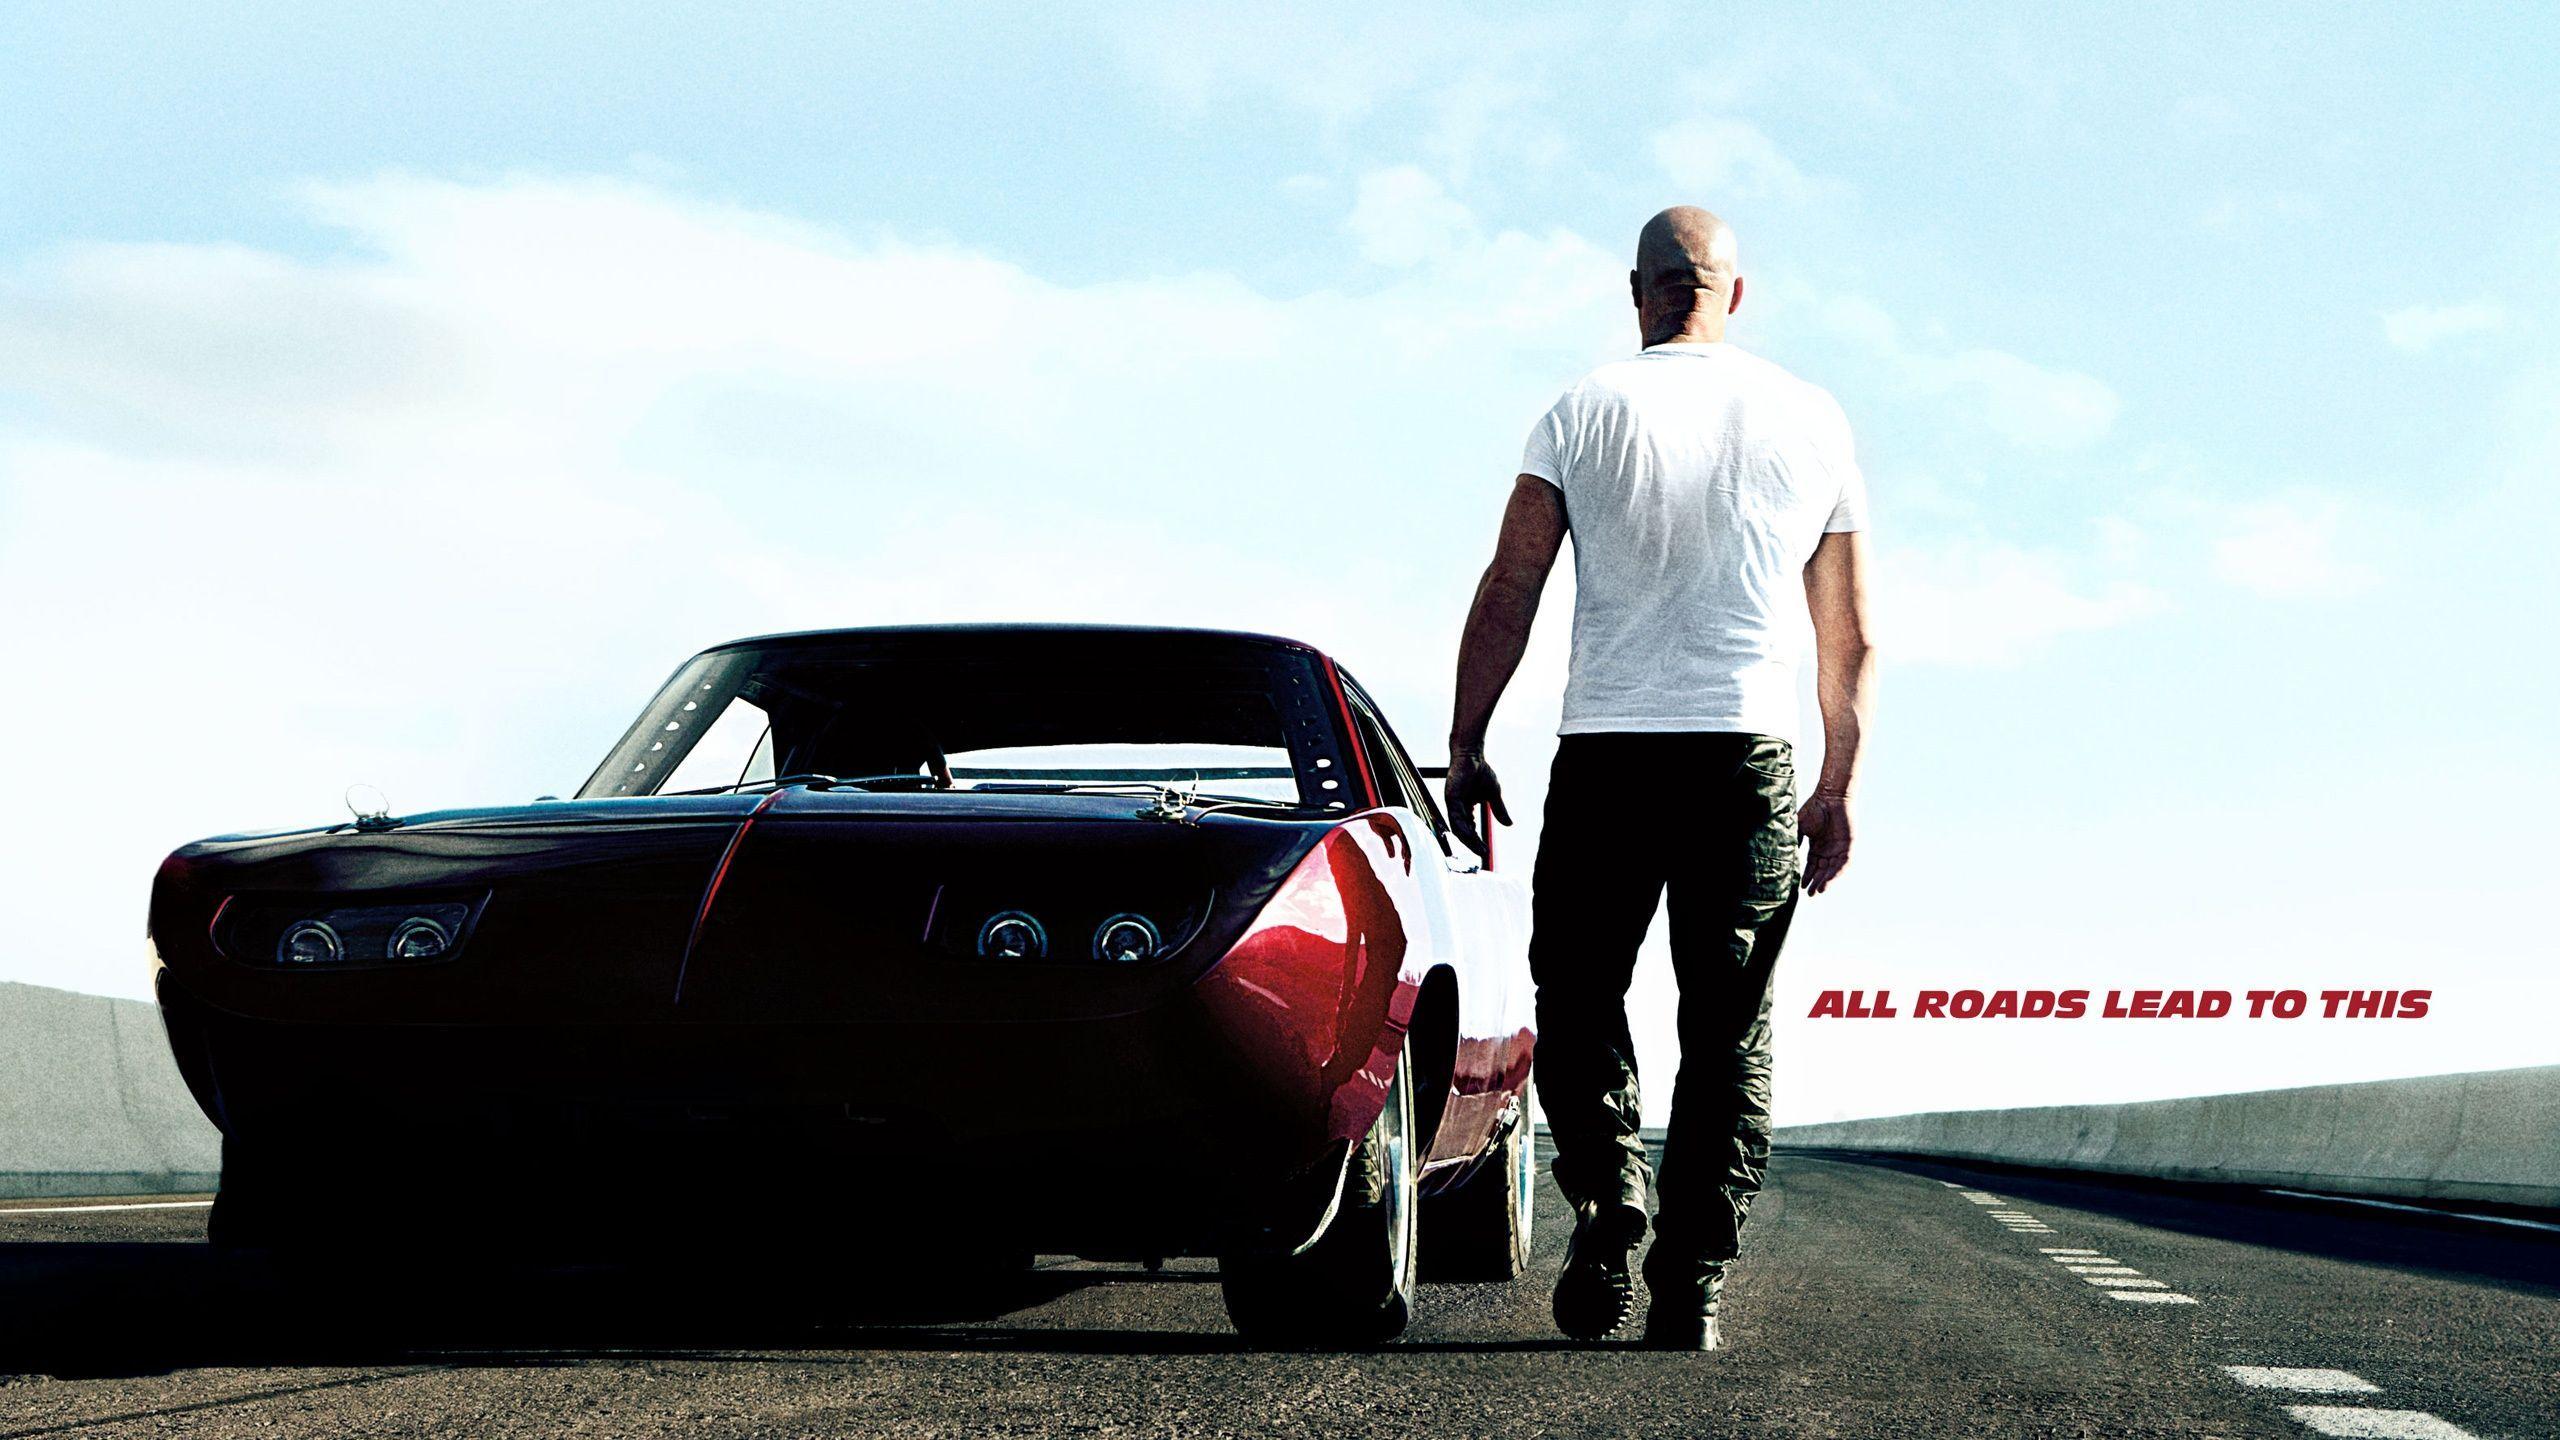 Fast And Furious Cars Wallpaper